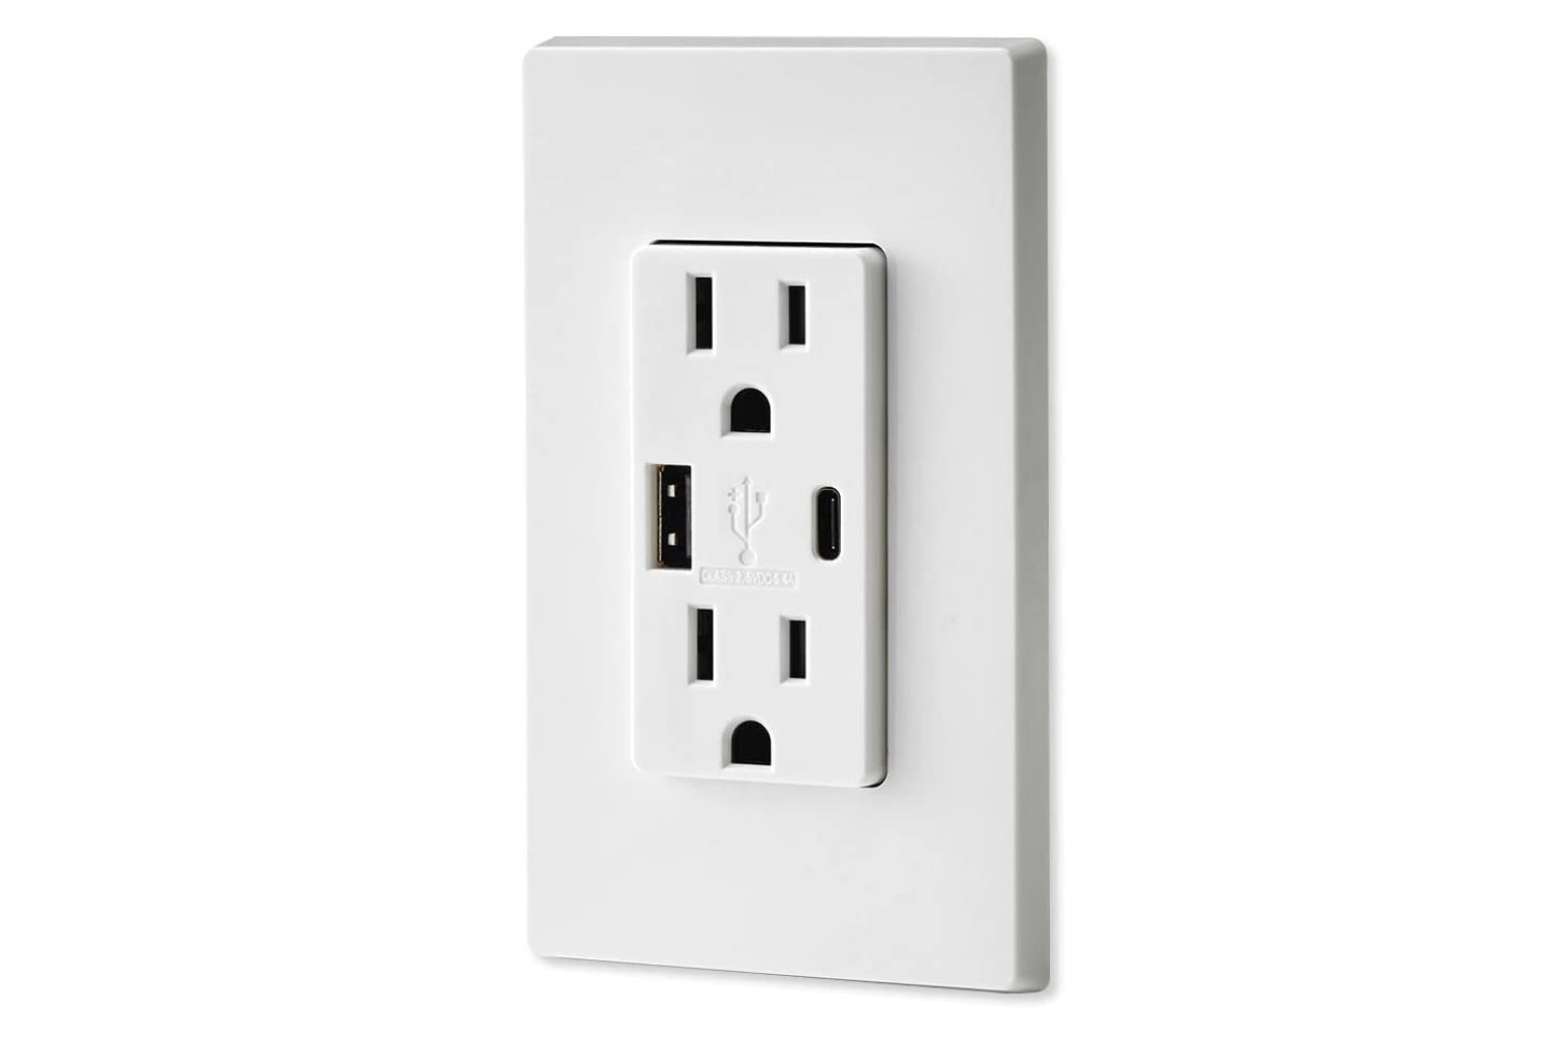 An updated outlet with USB A and C ports